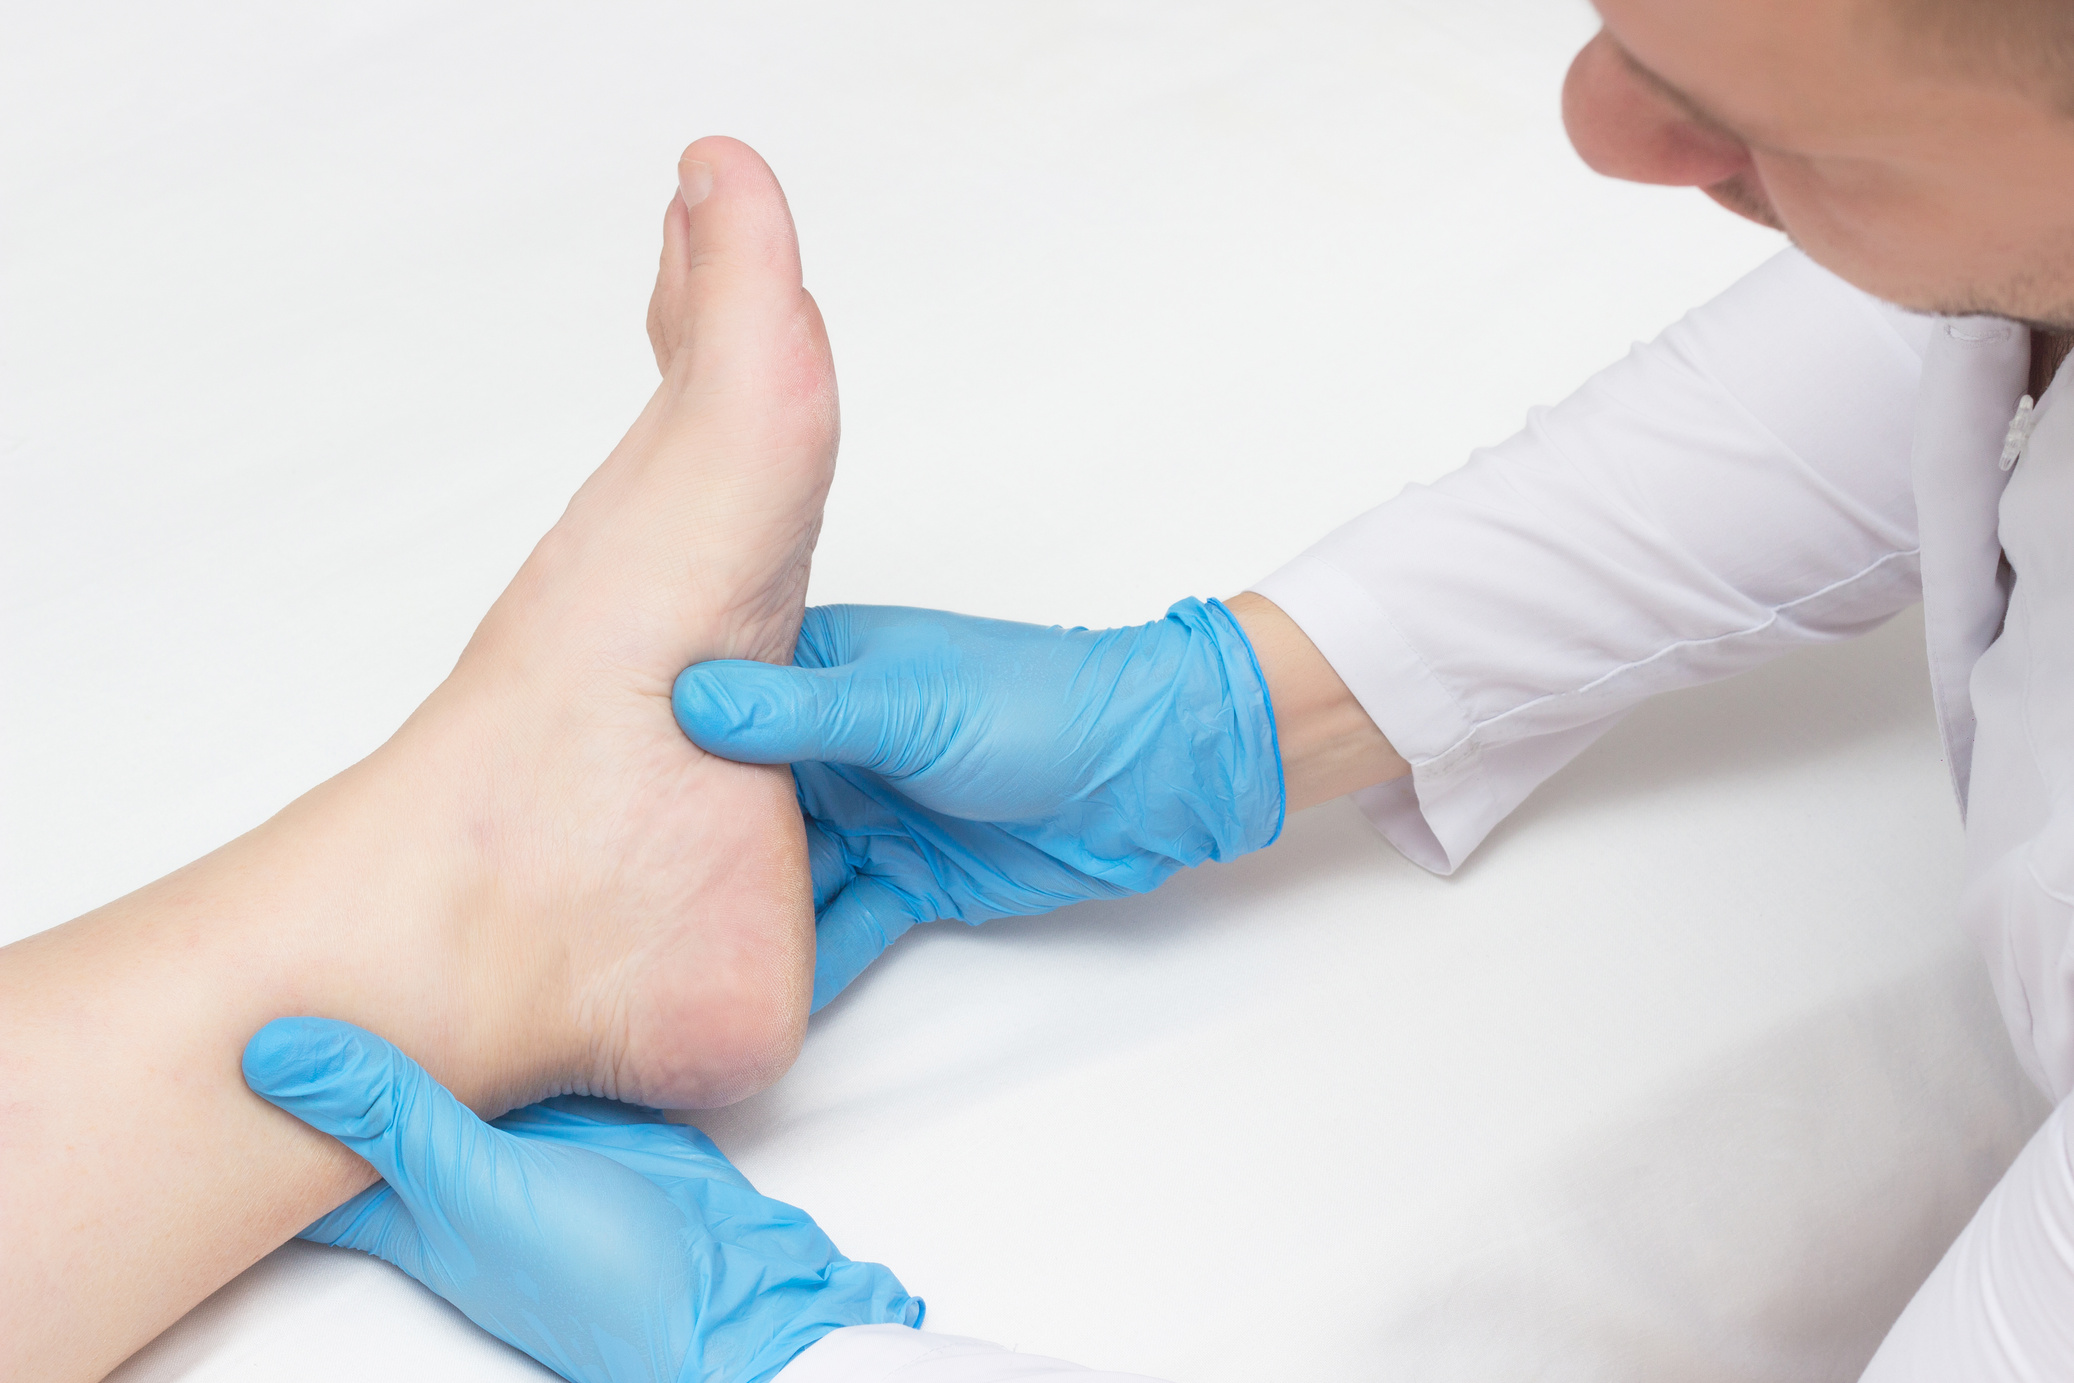 Doctor examines the patient's leg with heel spurs, pain in the foot, white background, close-up, plantar fasciitis